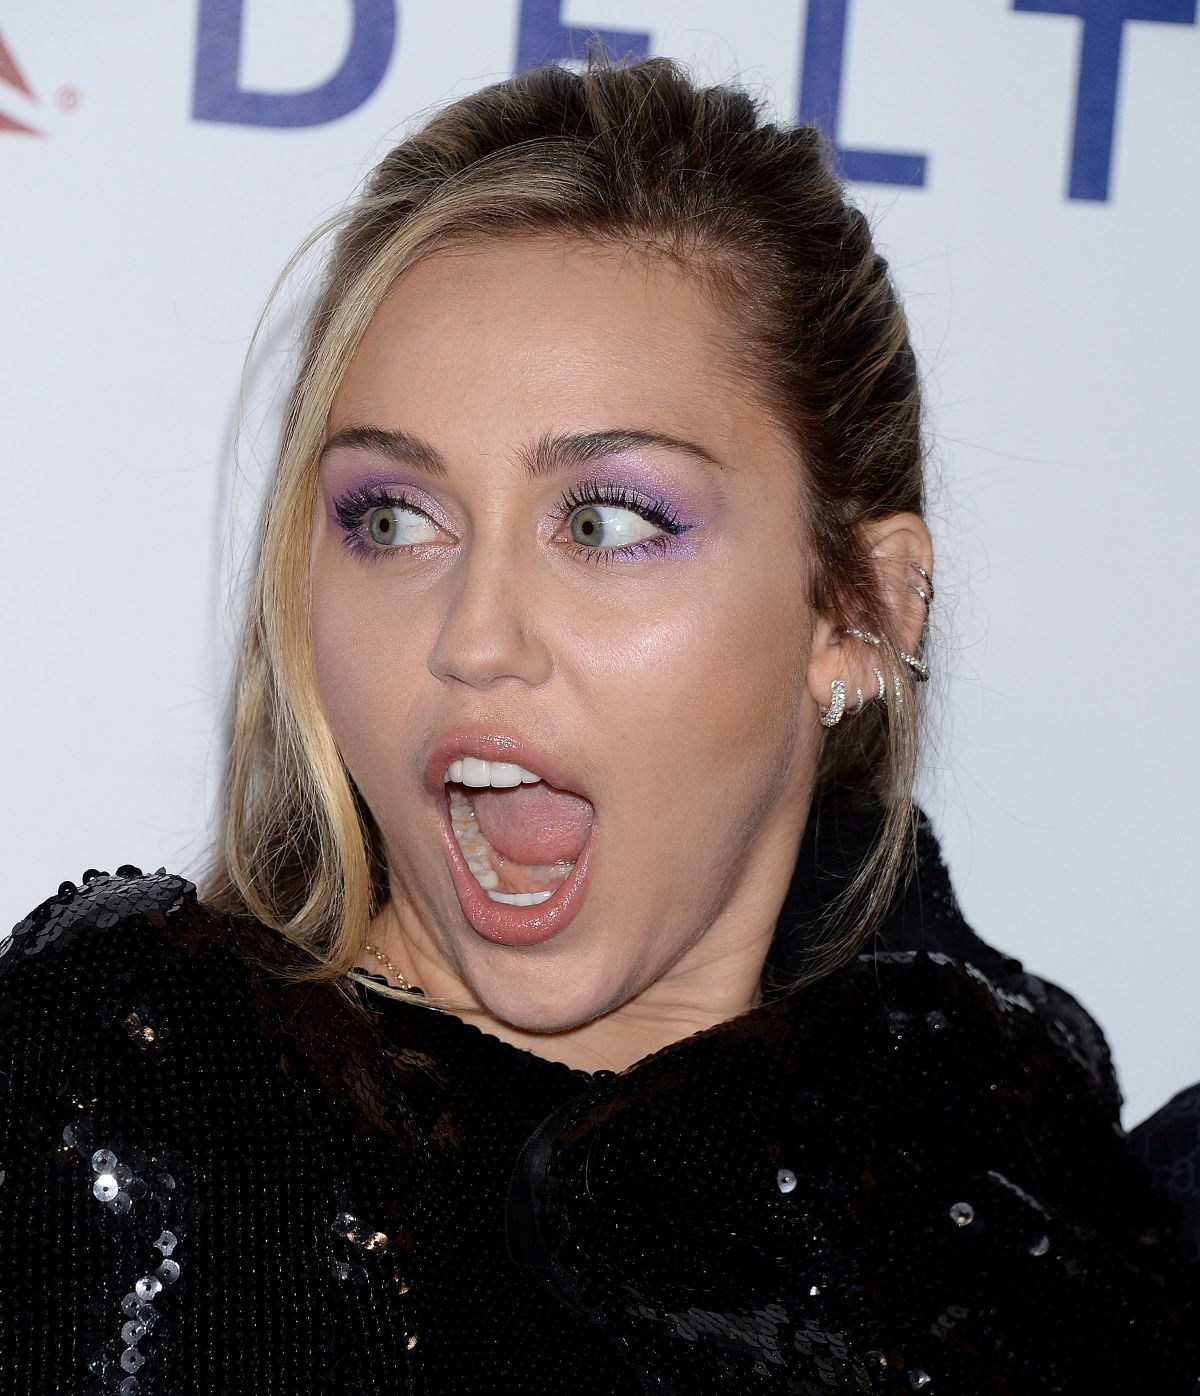 miley-cyrus-at-musicares-person-of-the-year-honoring-dolly-parton-in-los-angeles-02-08-2019-1.jpg